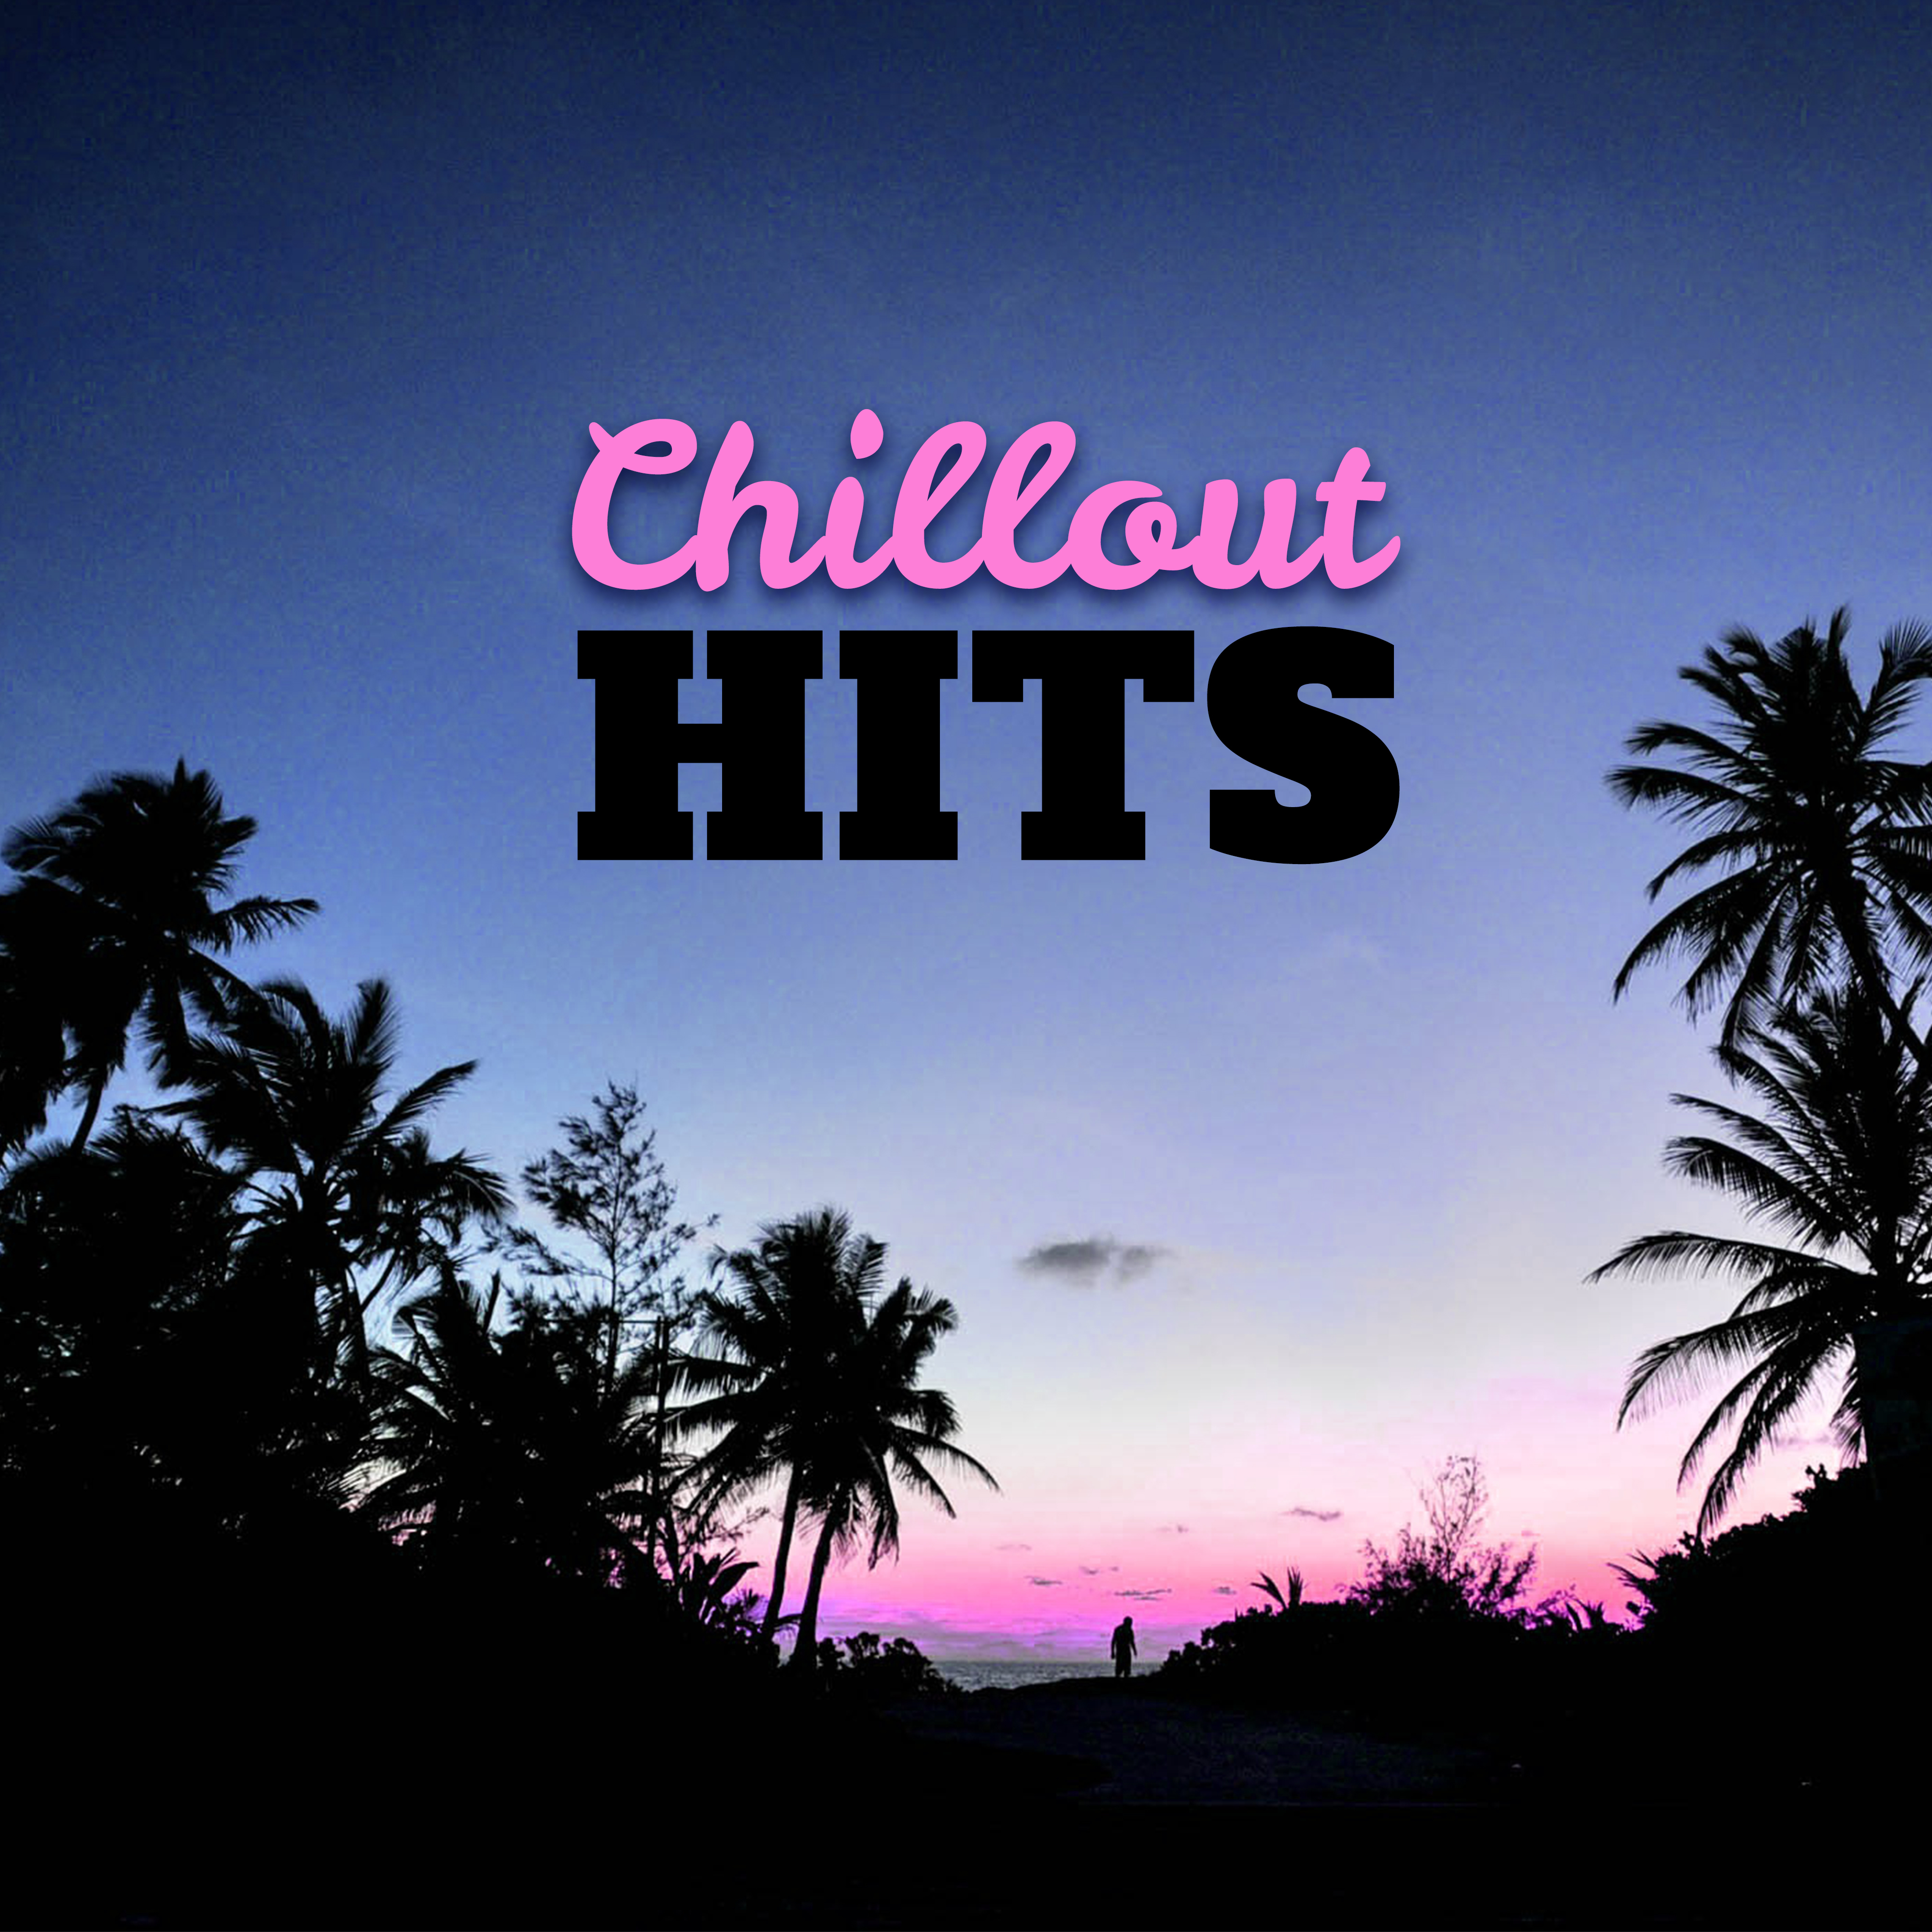 Chillout Hits – Ibiza Beach Party, *** Music, Sensual Dance, Bar Chill Out, Cocktail Party, Ibiza Lounge Club, Summer 2017